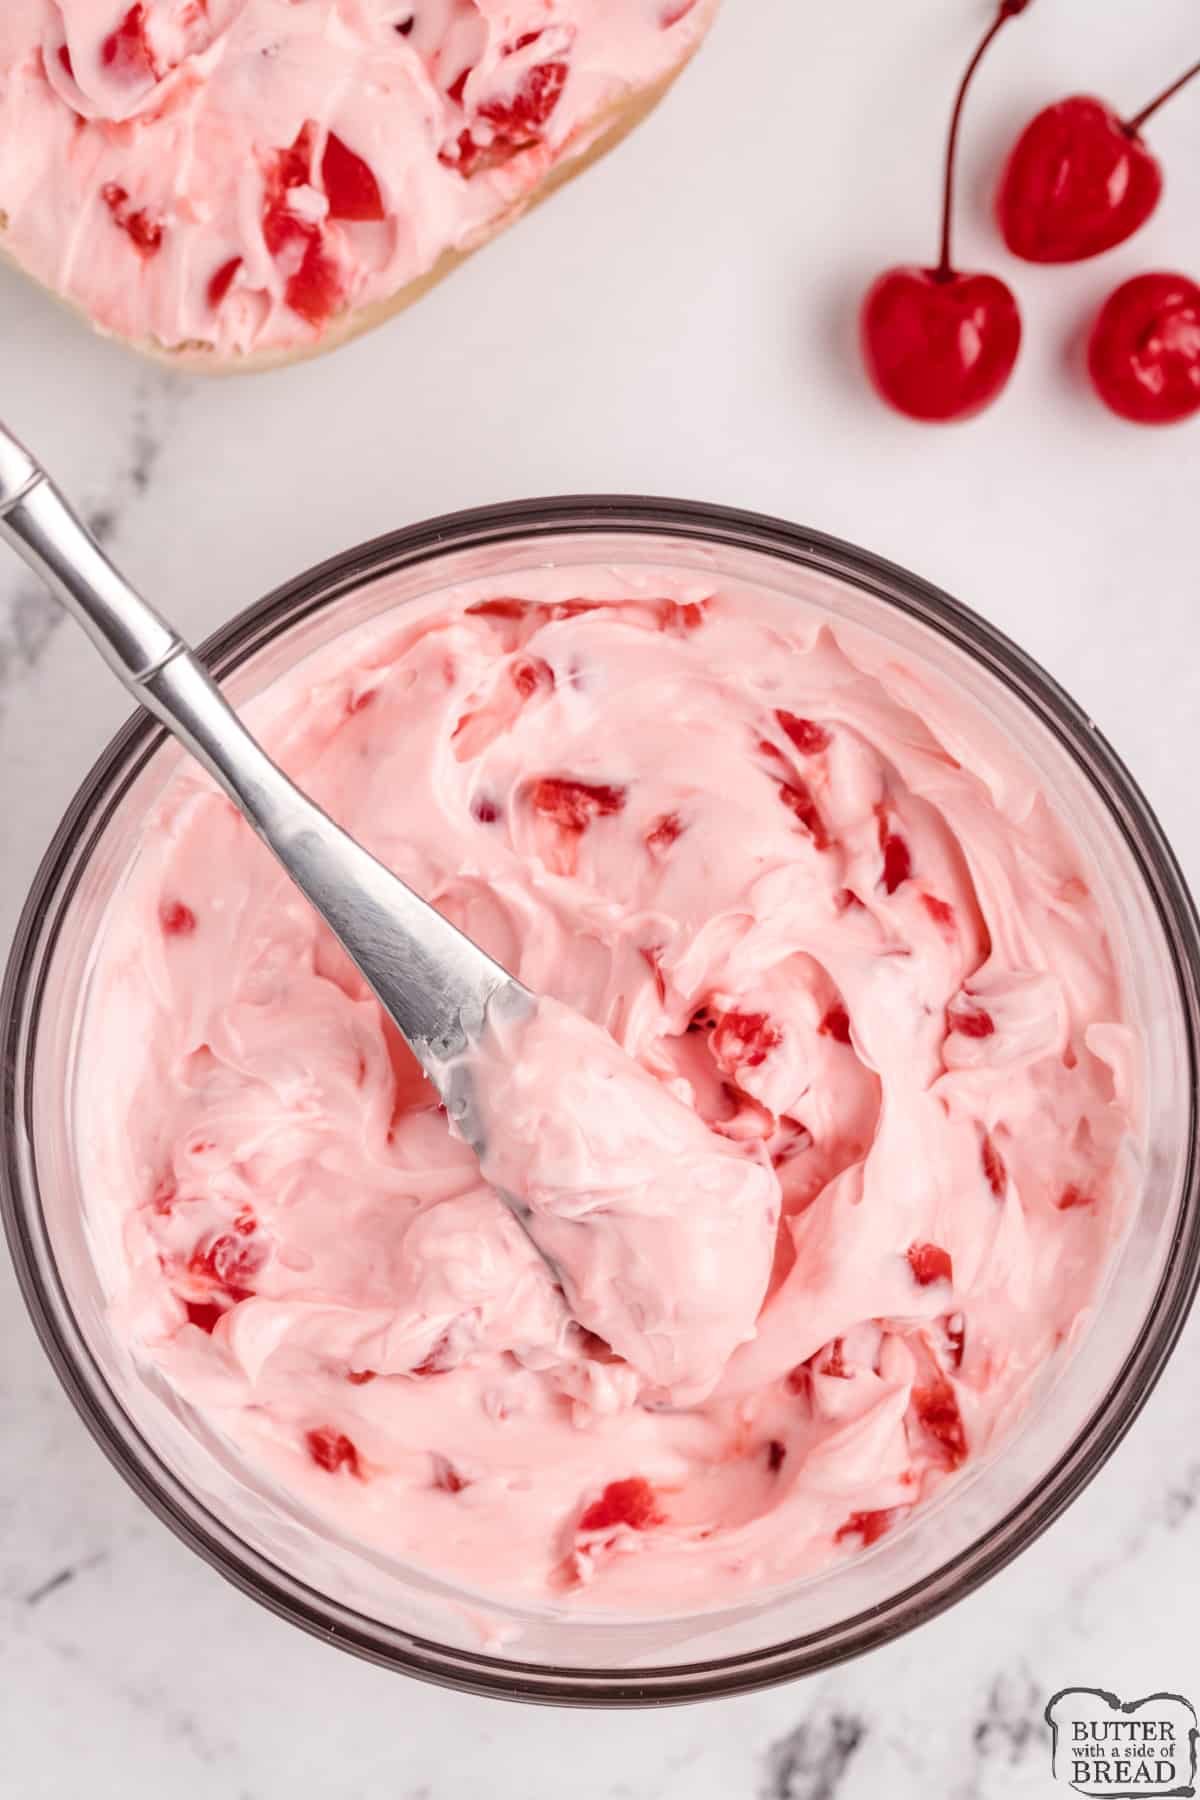 Cream cheese spread with cherries